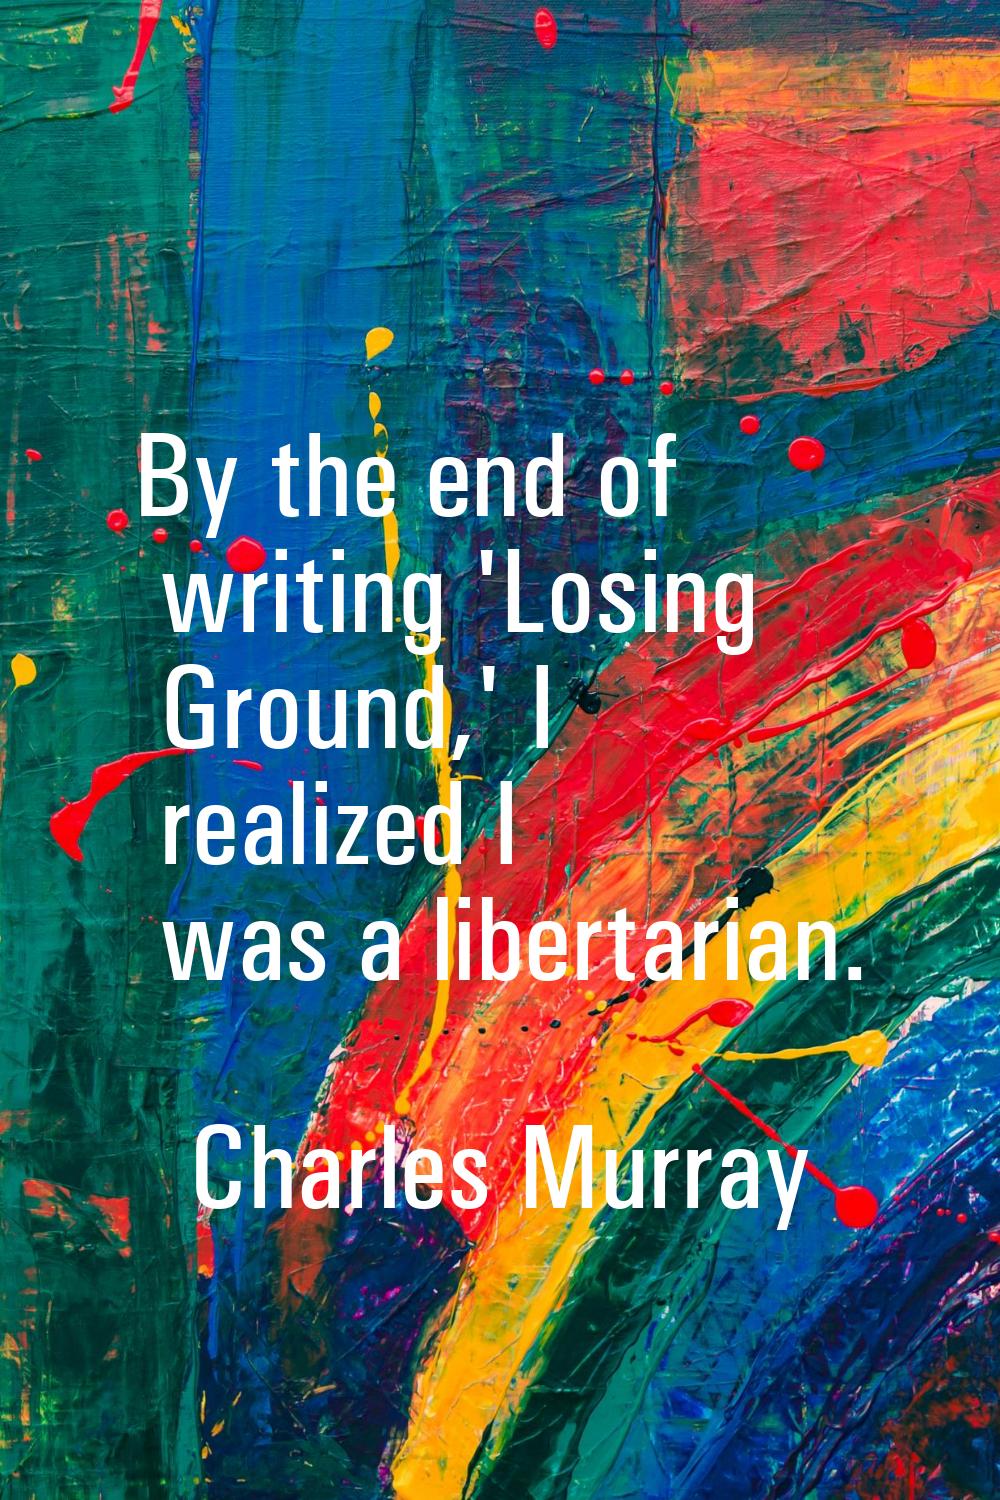 By the end of writing 'Losing Ground,' I realized I was a libertarian.